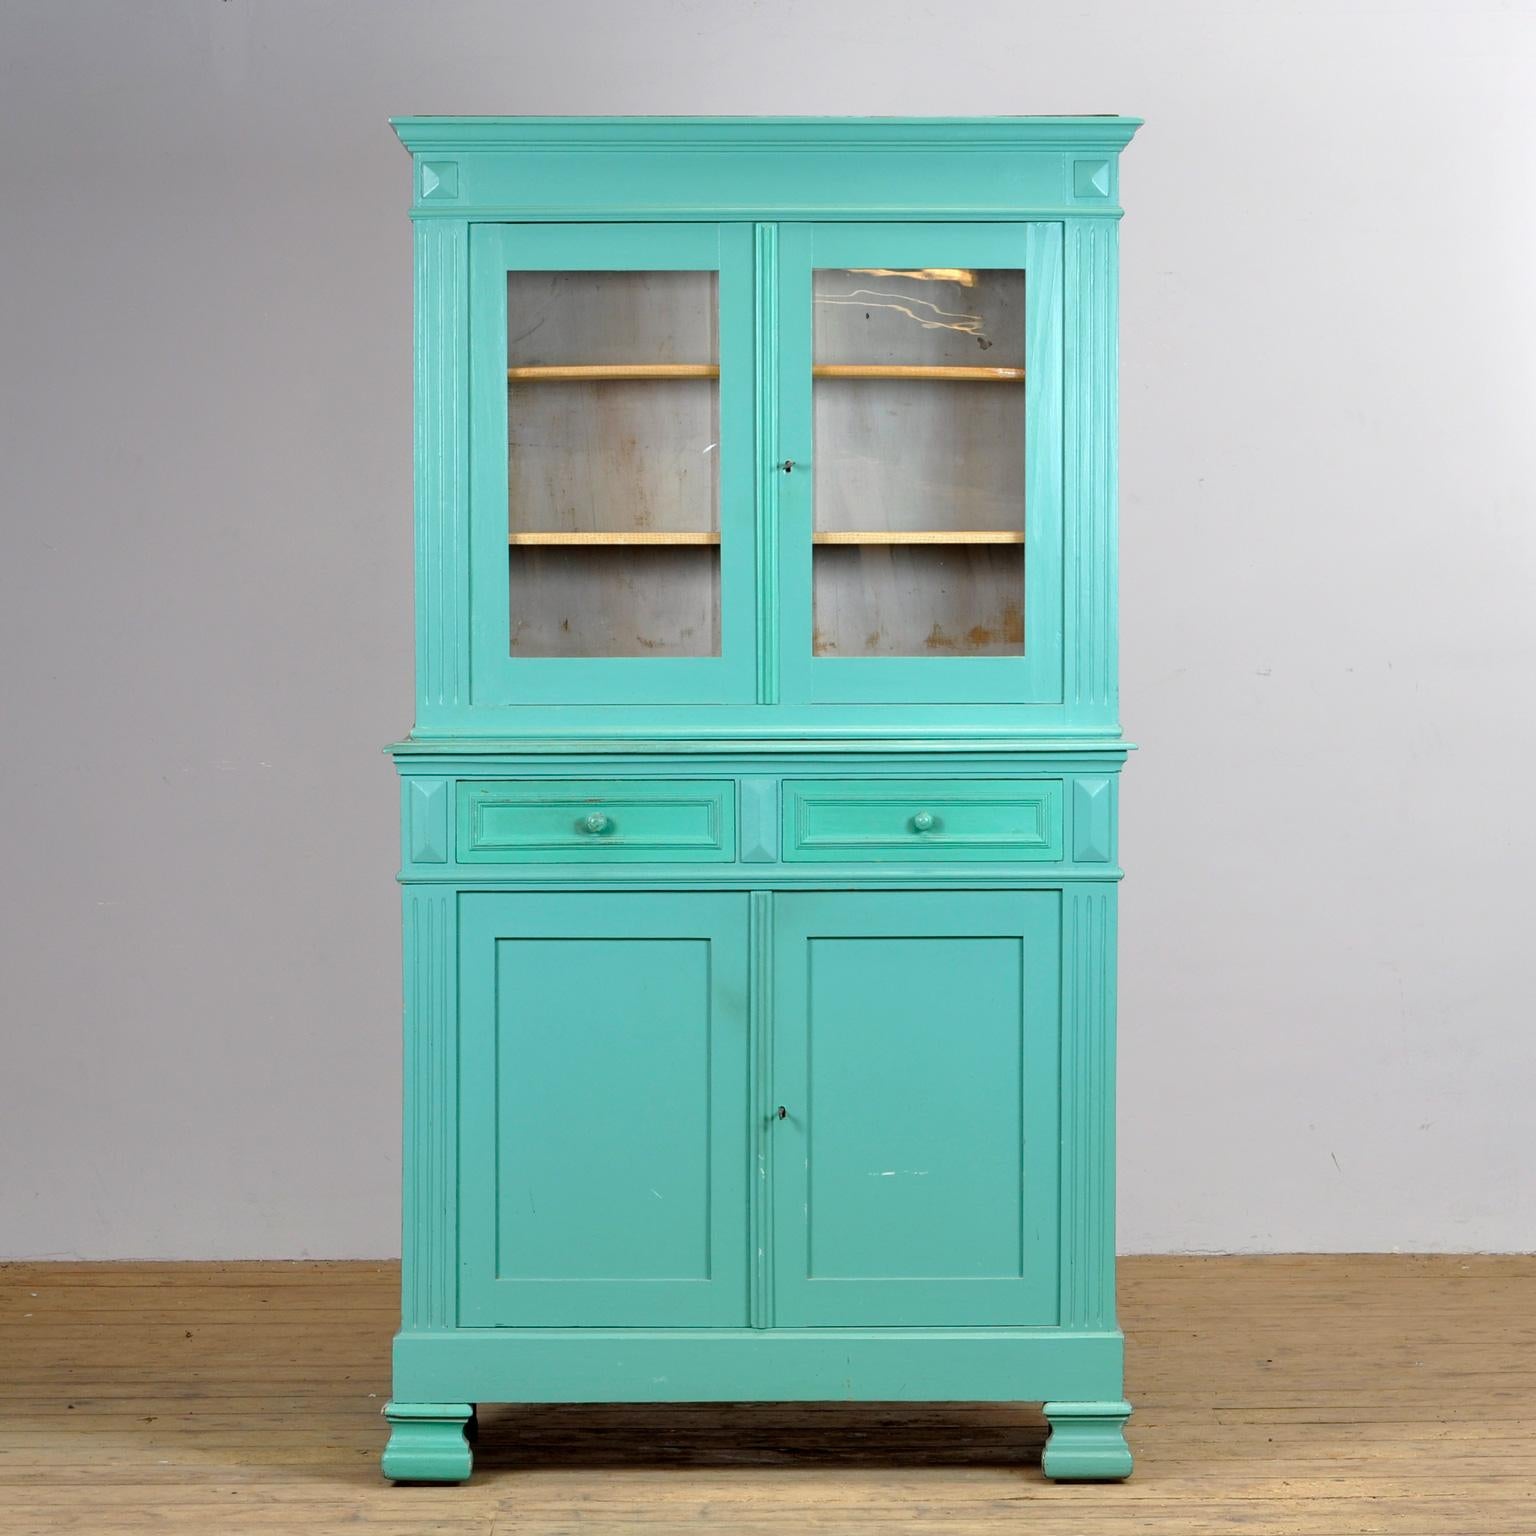 Pine kitchen cupboard from the 1940s. The cabinet consists of 2 separate parts. In the upper part 2 shelves behind glass. At the bottom 2 drawers and behind the doors 2 shelves for plenty of storage space.
Measures: depth of the to part is 30 cm.